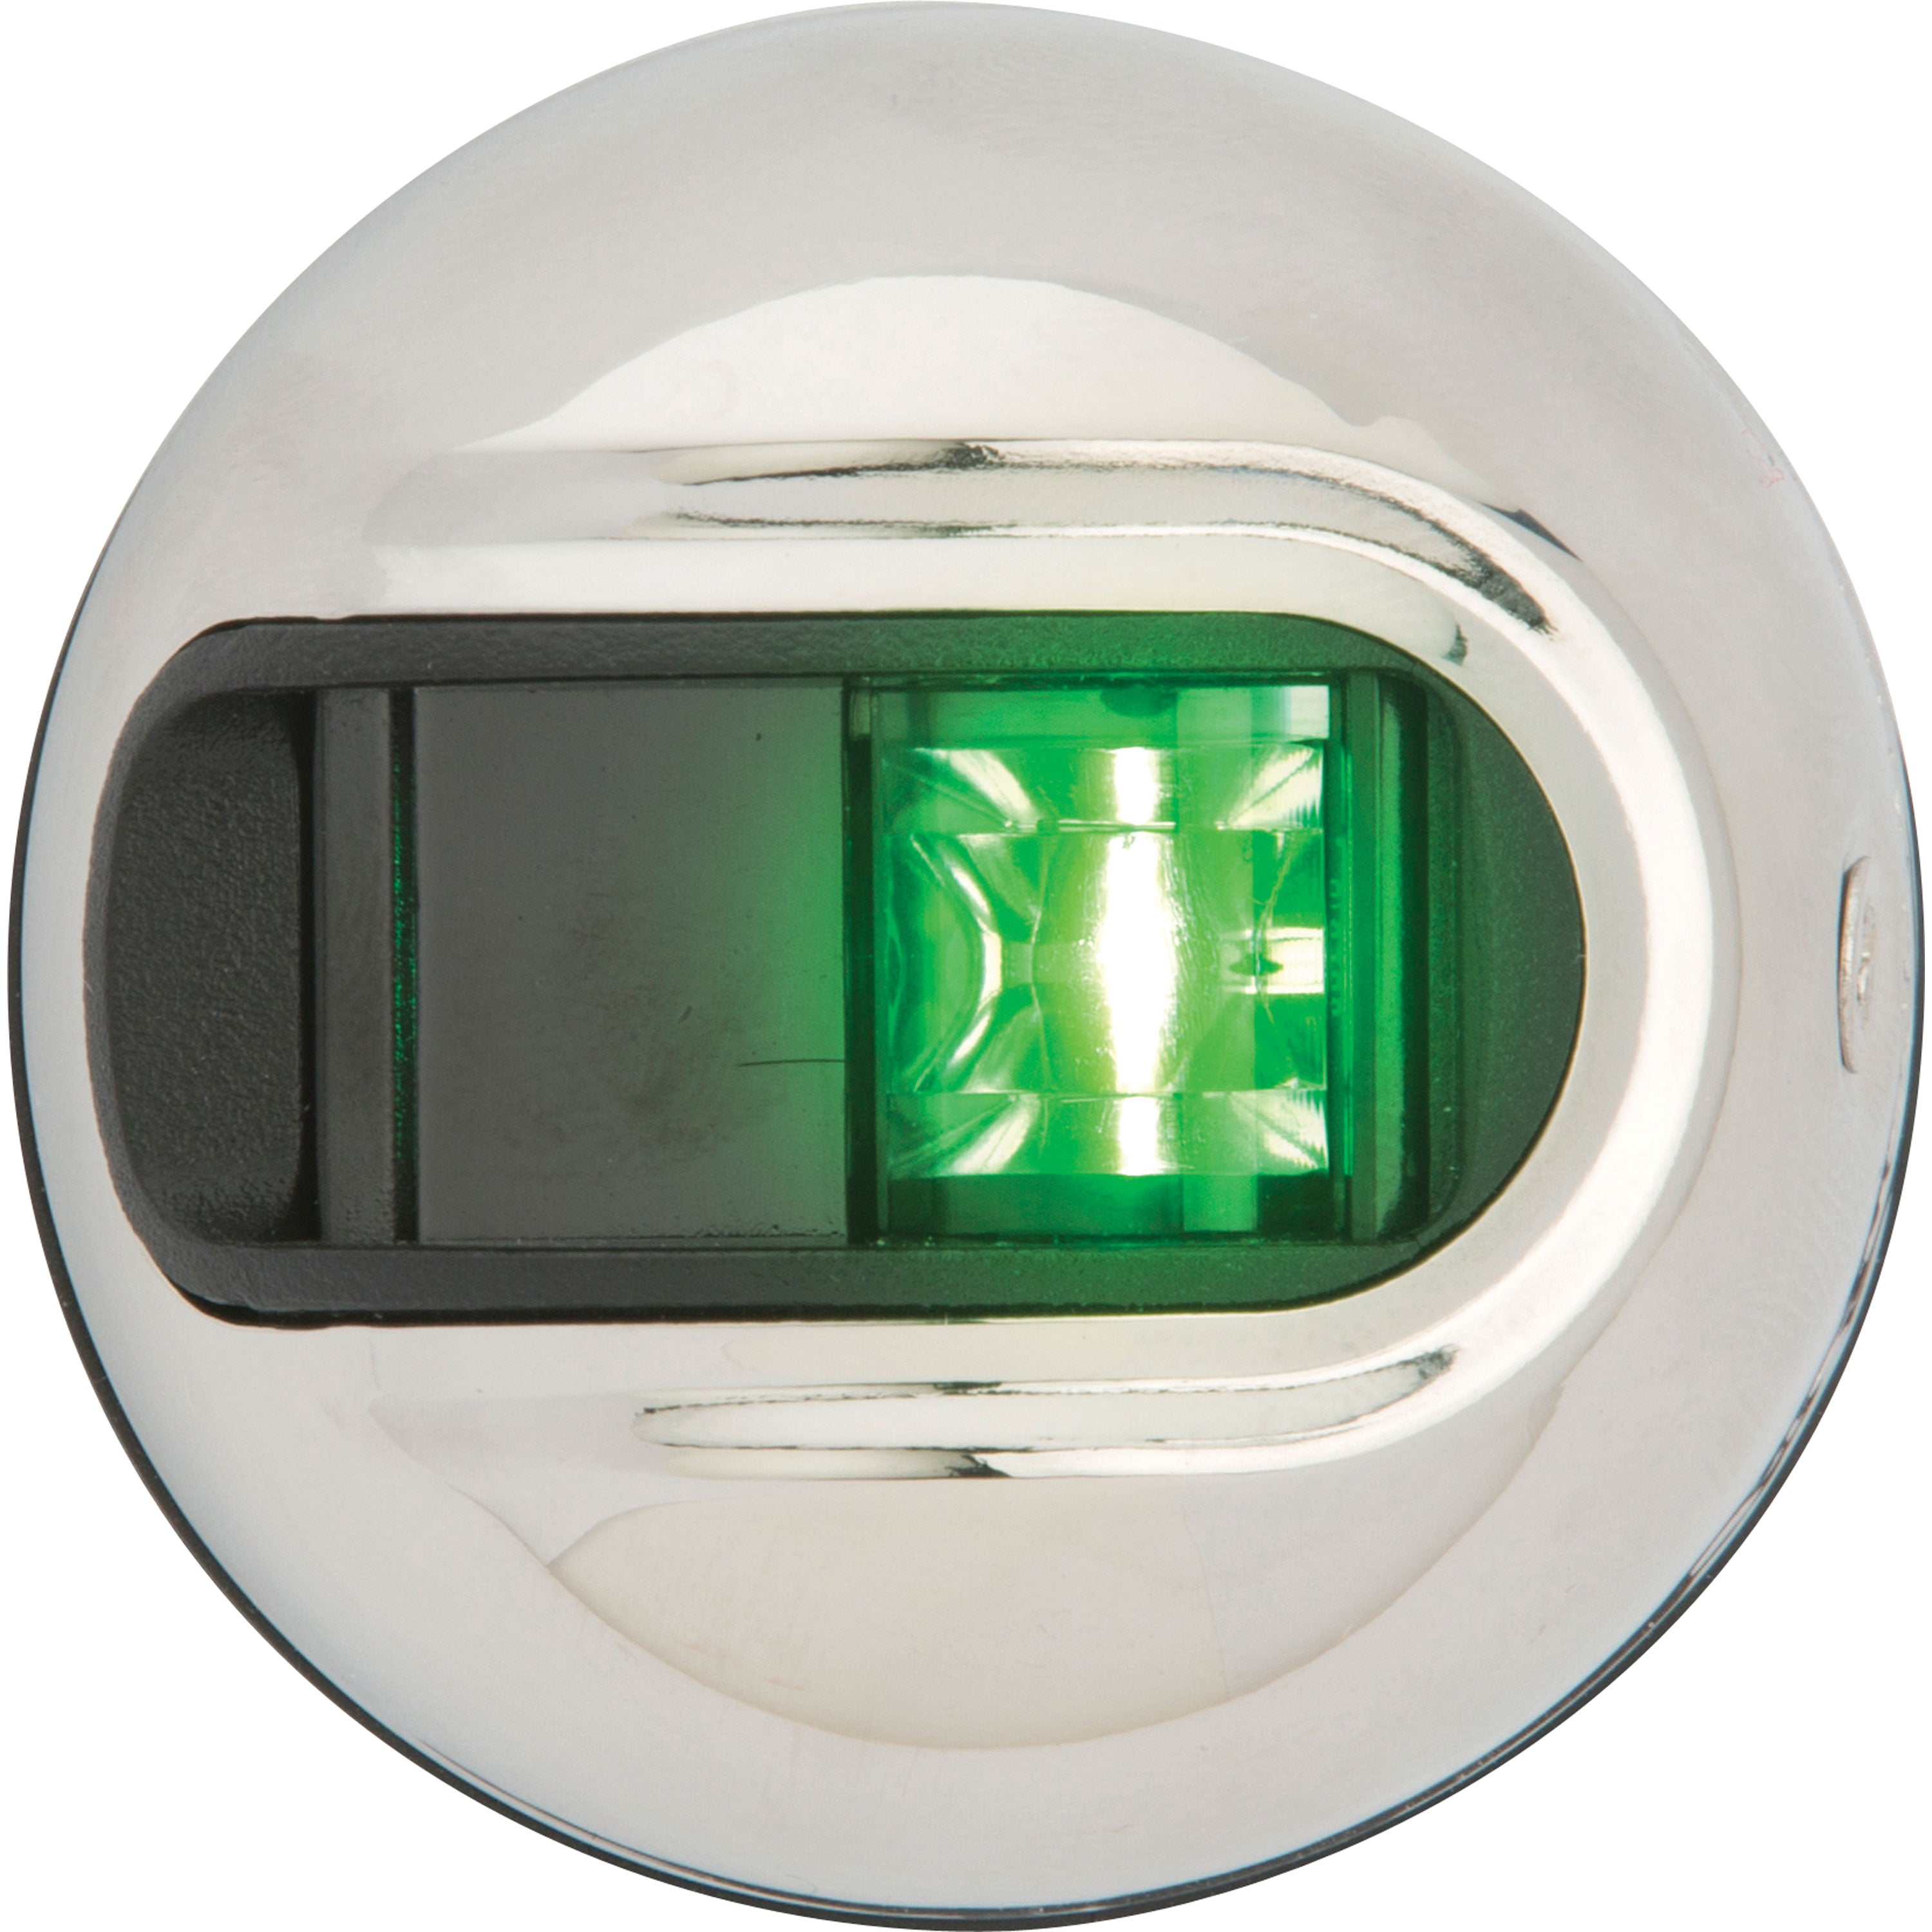 Attwood NV3012SSG-7 Sidelights Vertical - Starboard, Green/Stainless